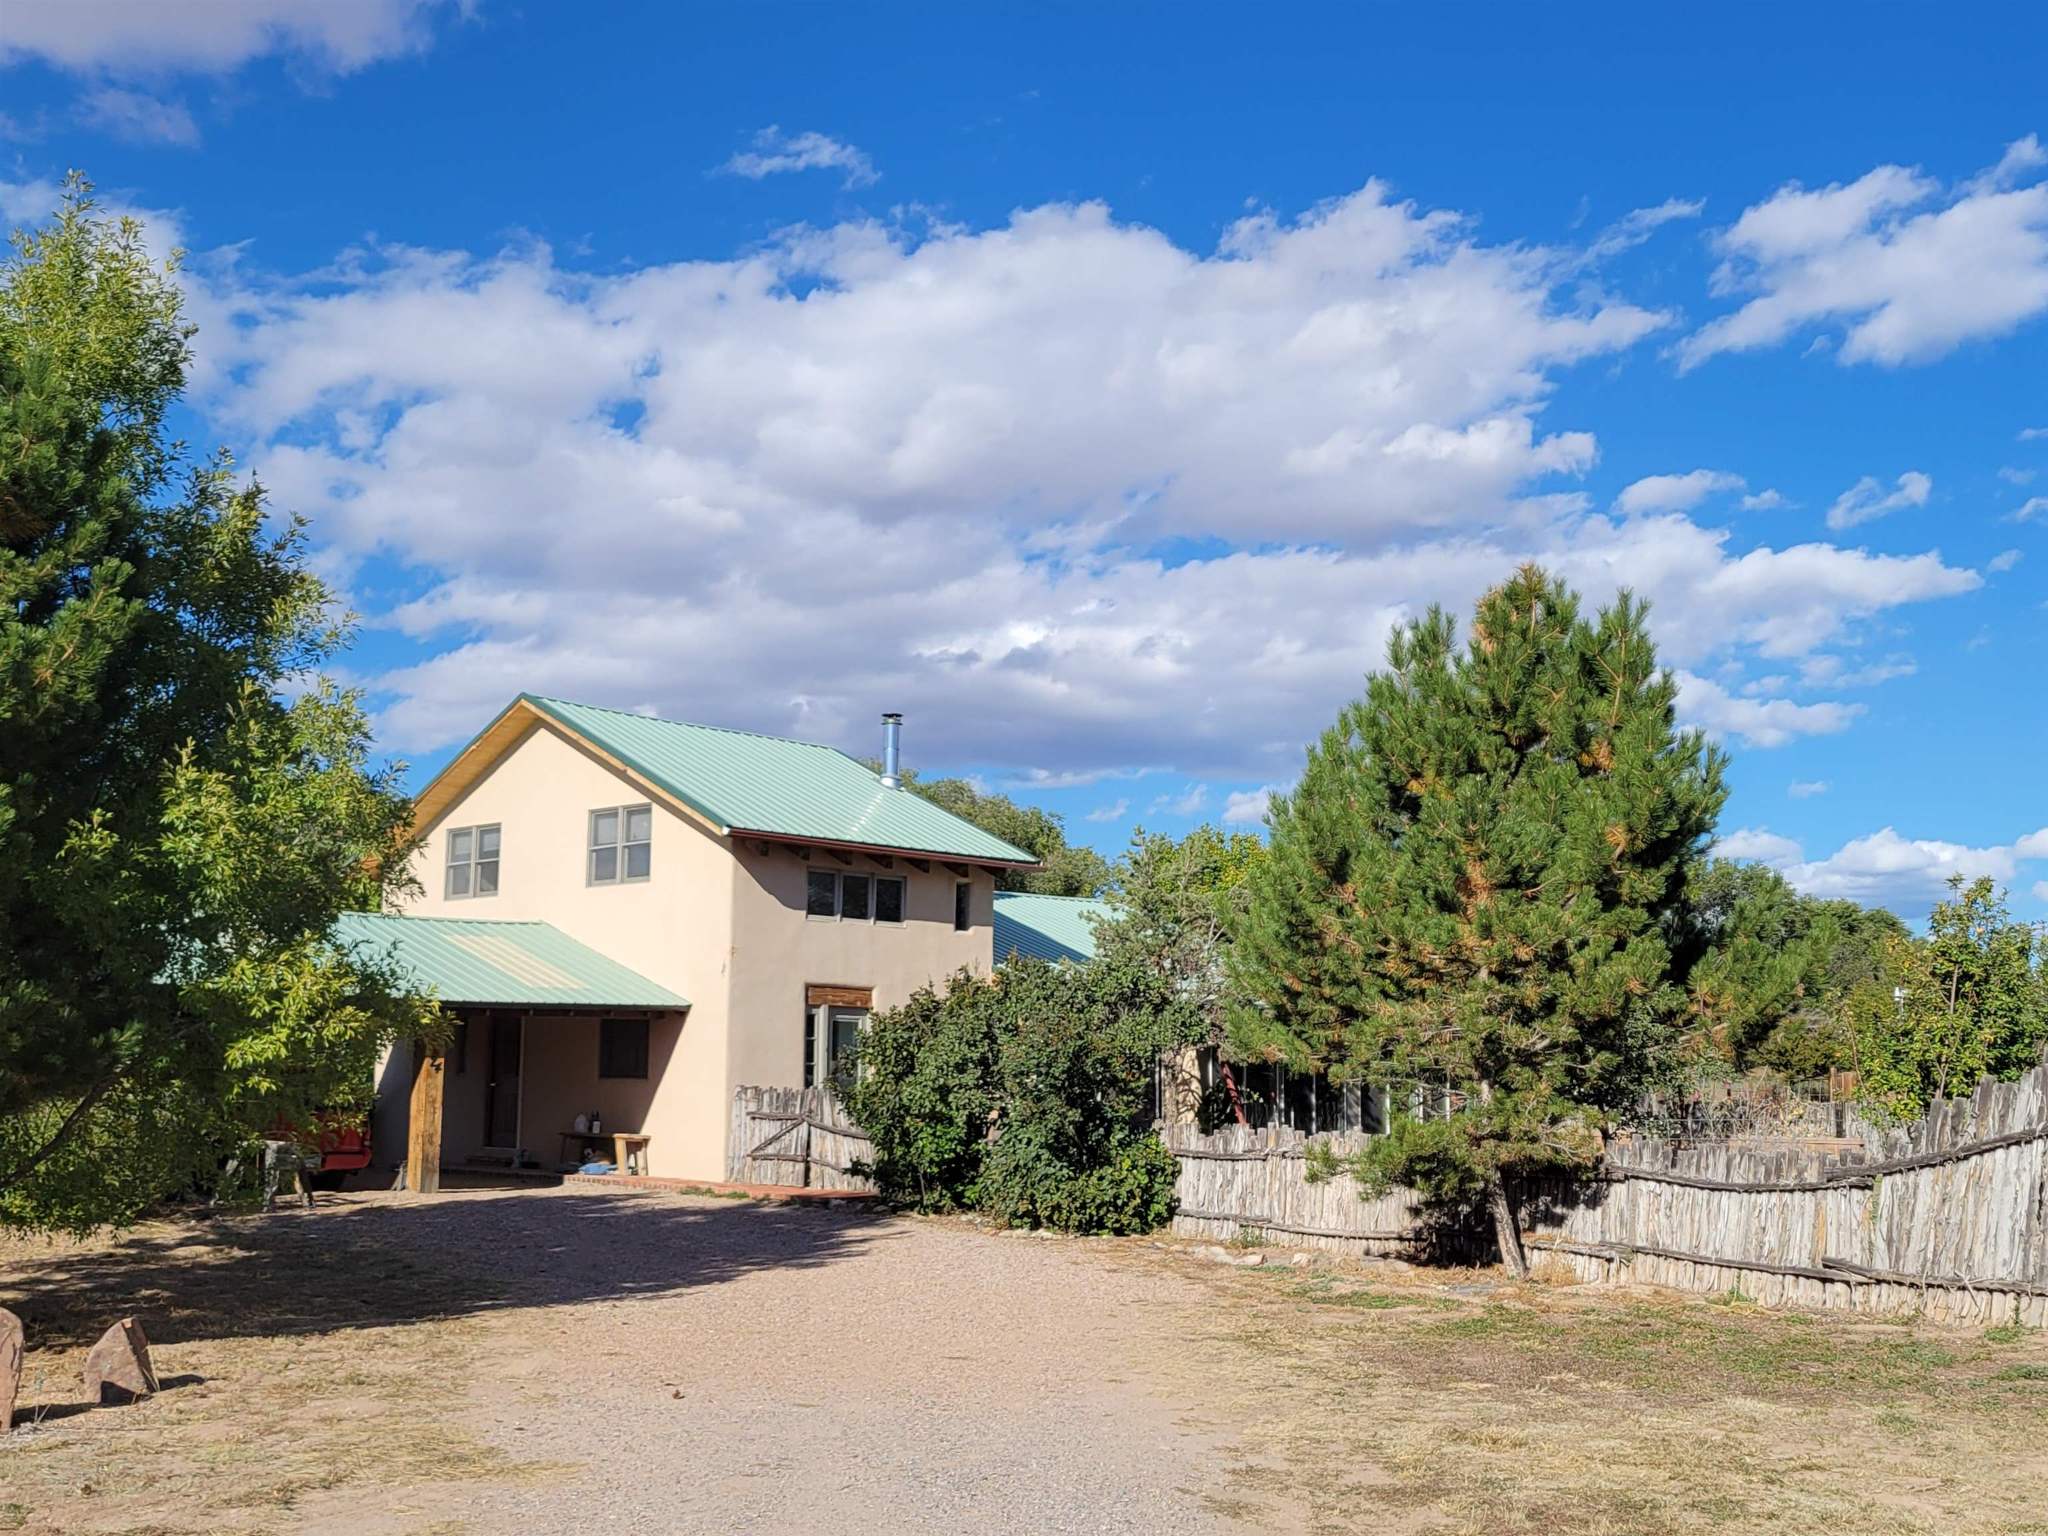 24 CALLE LILA, Santa Fe, New Mexico 87506, 2 Bedrooms Bedrooms, ,2 BathroomsBathrooms,Residential,For Sale,24 CALLE LILA,202104672